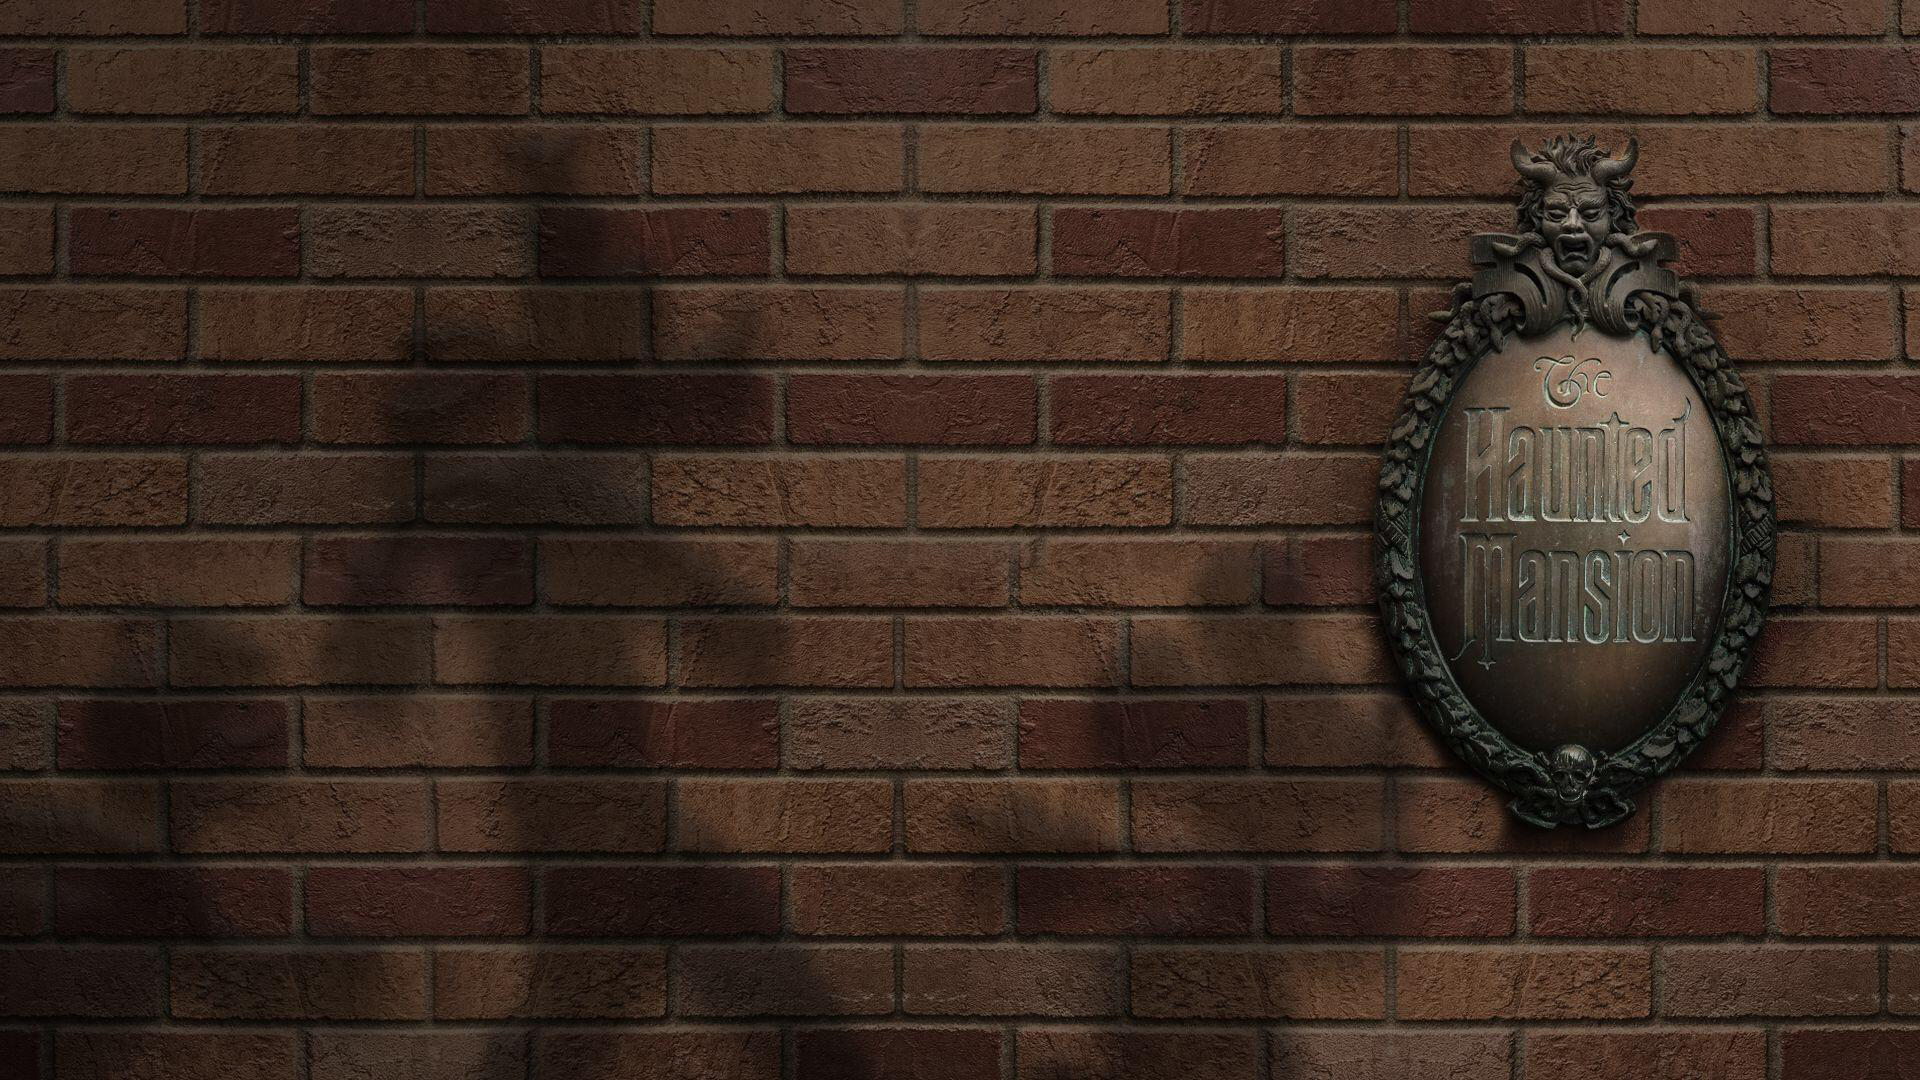 Haunted Mansion Board In The Brick Wall 2K Movies